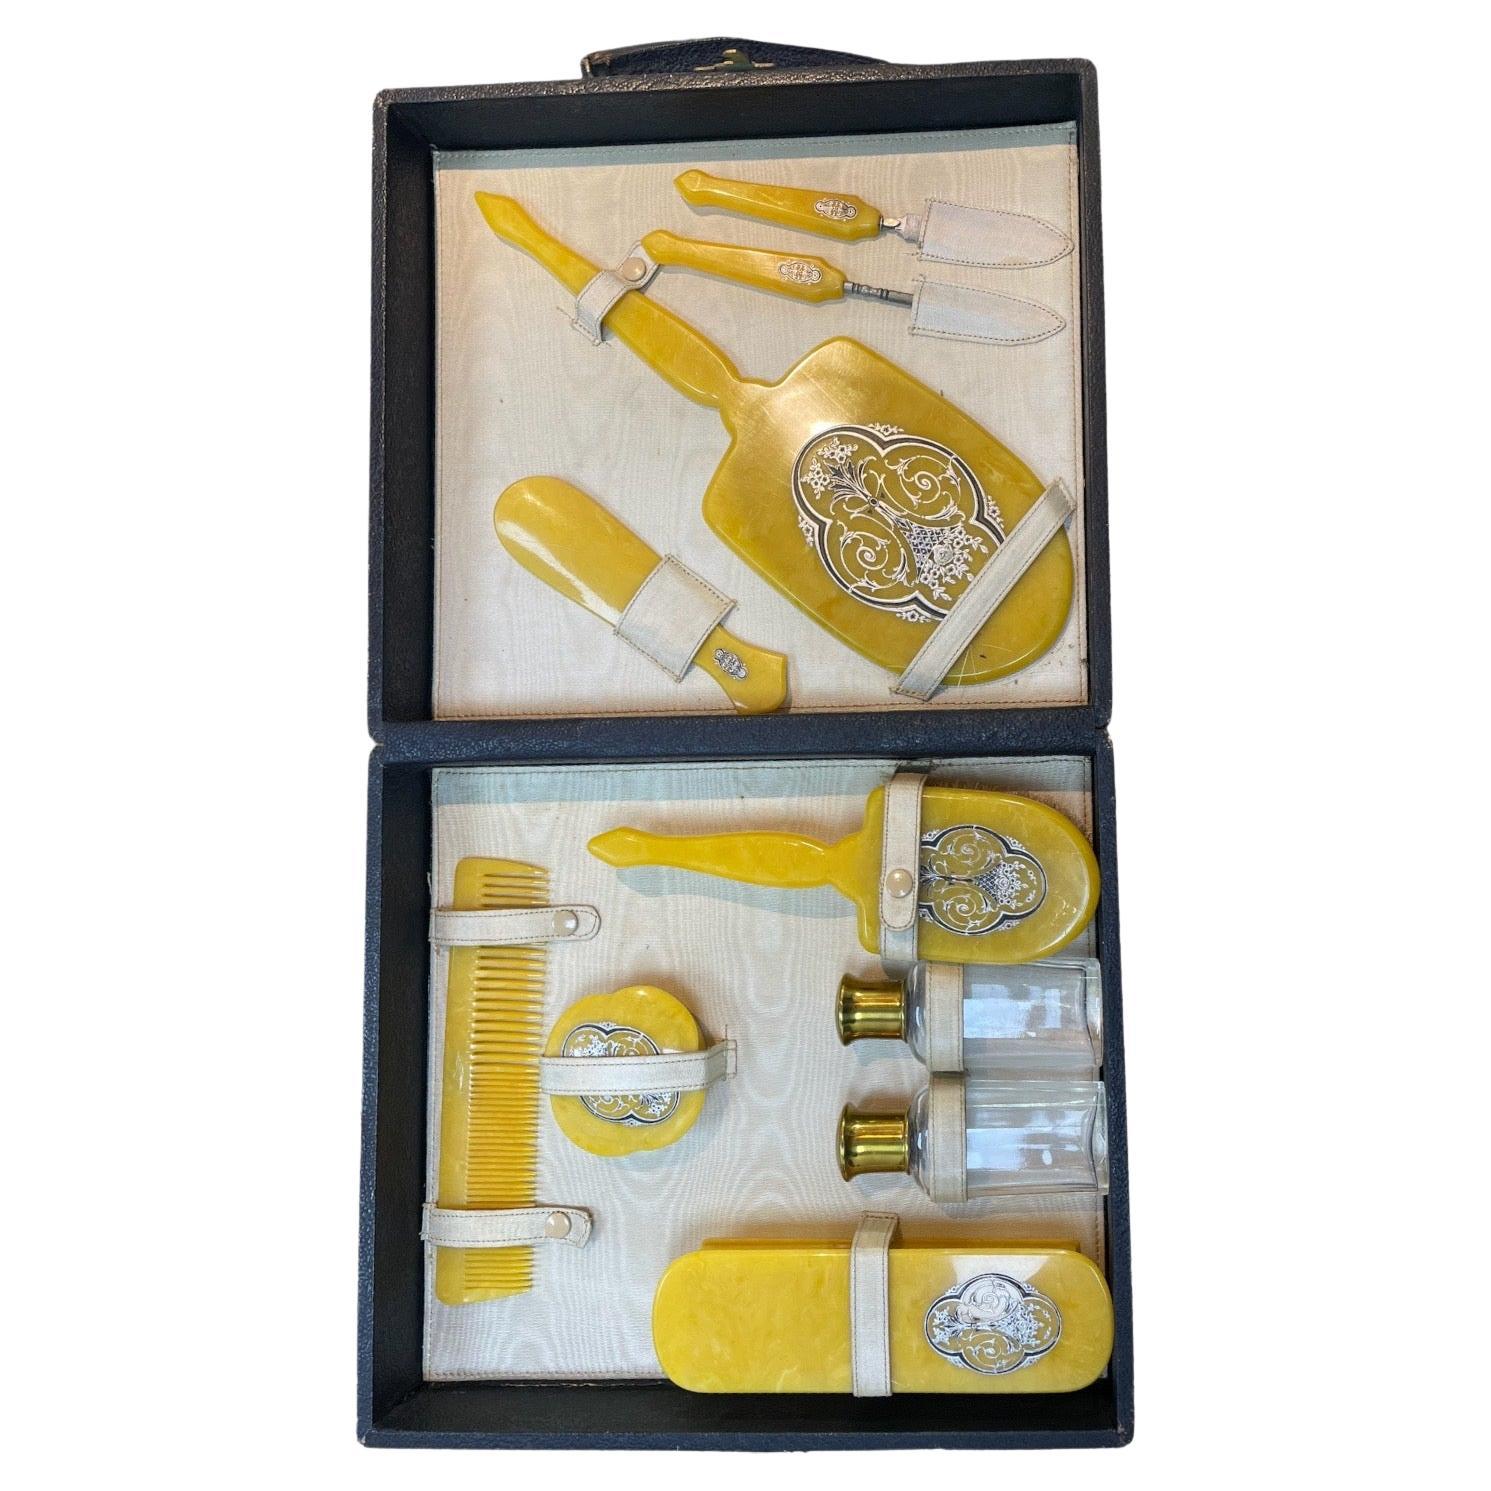 Antique Travel Grooming Kit For Sale